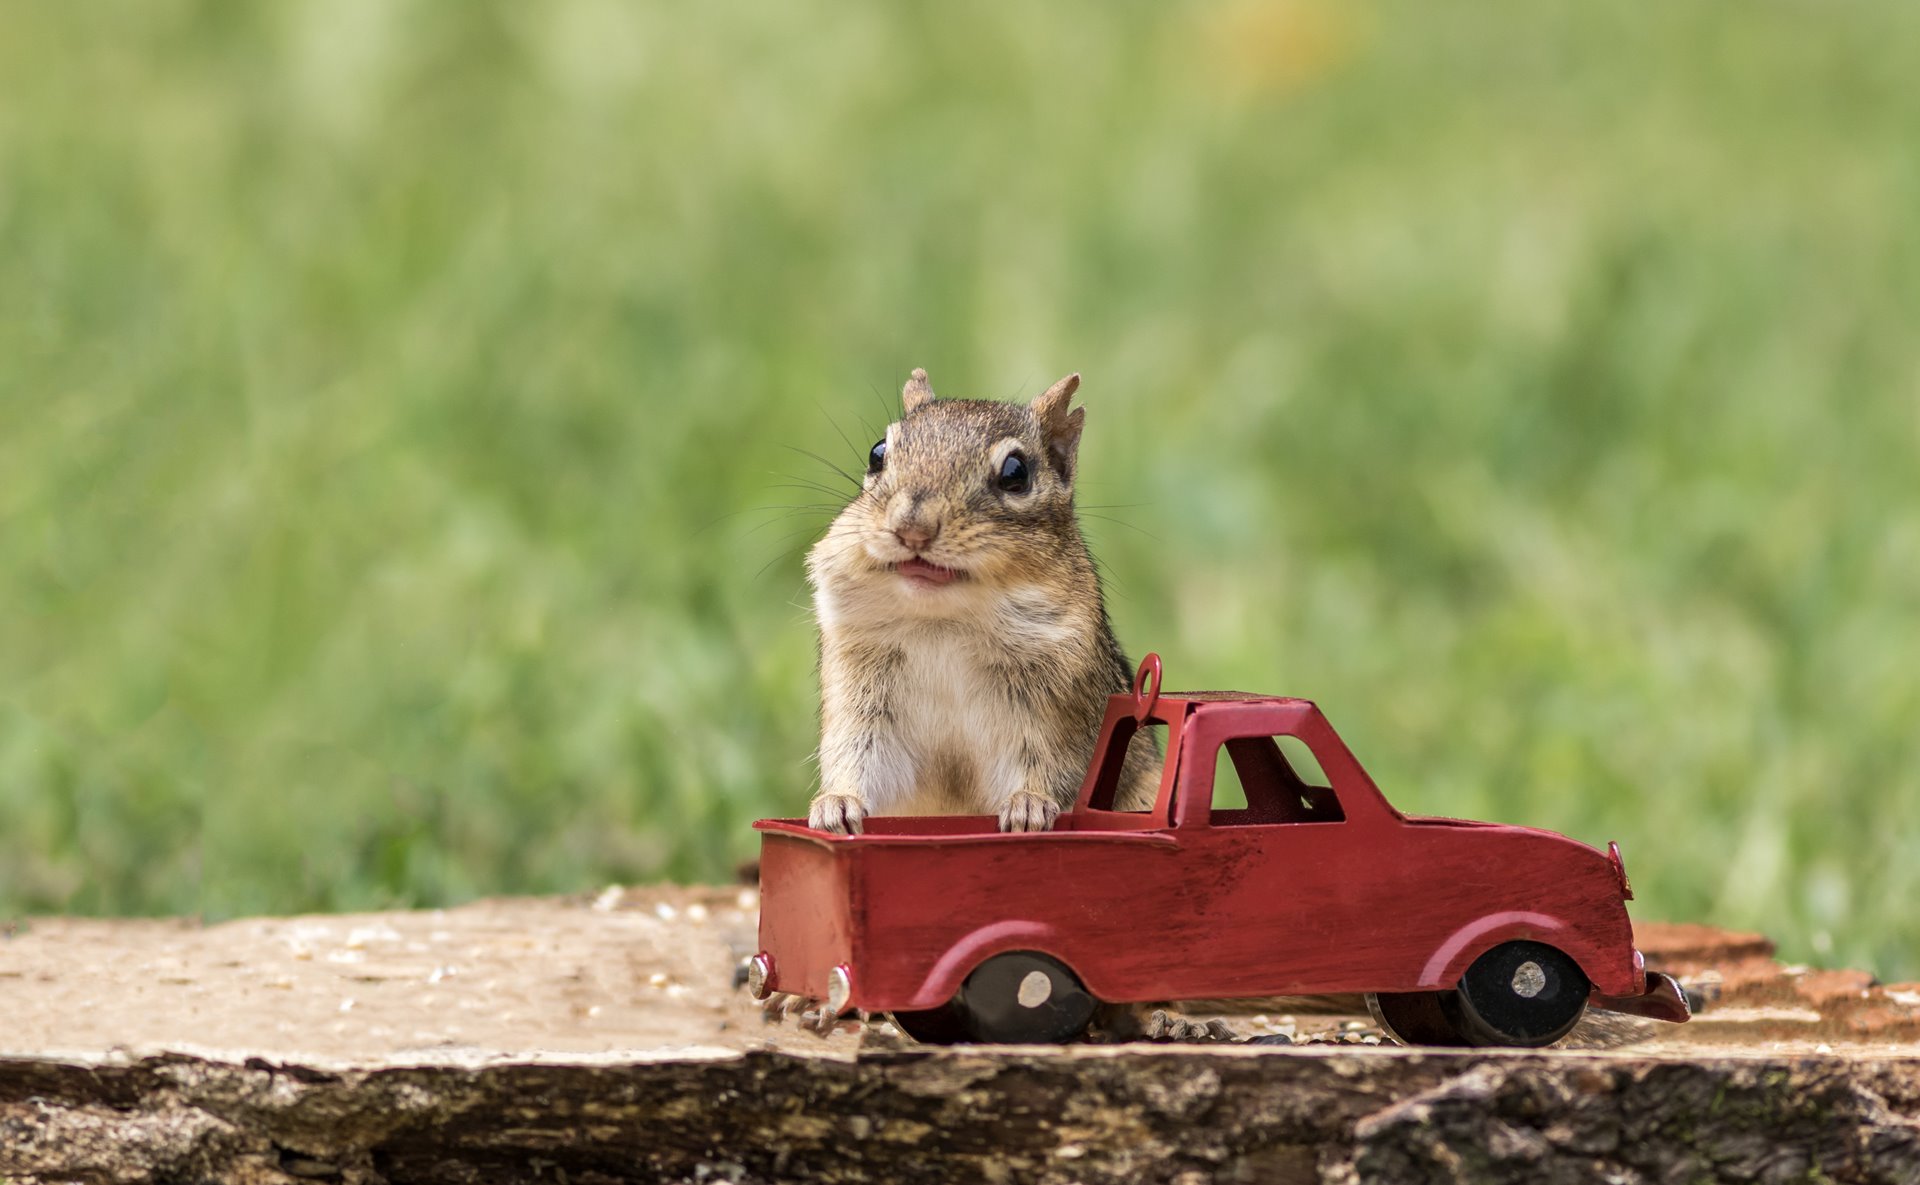 chipmunk-stuffs-checks-with-peanuts-out-of-red-truck-for-fall-season.jpg